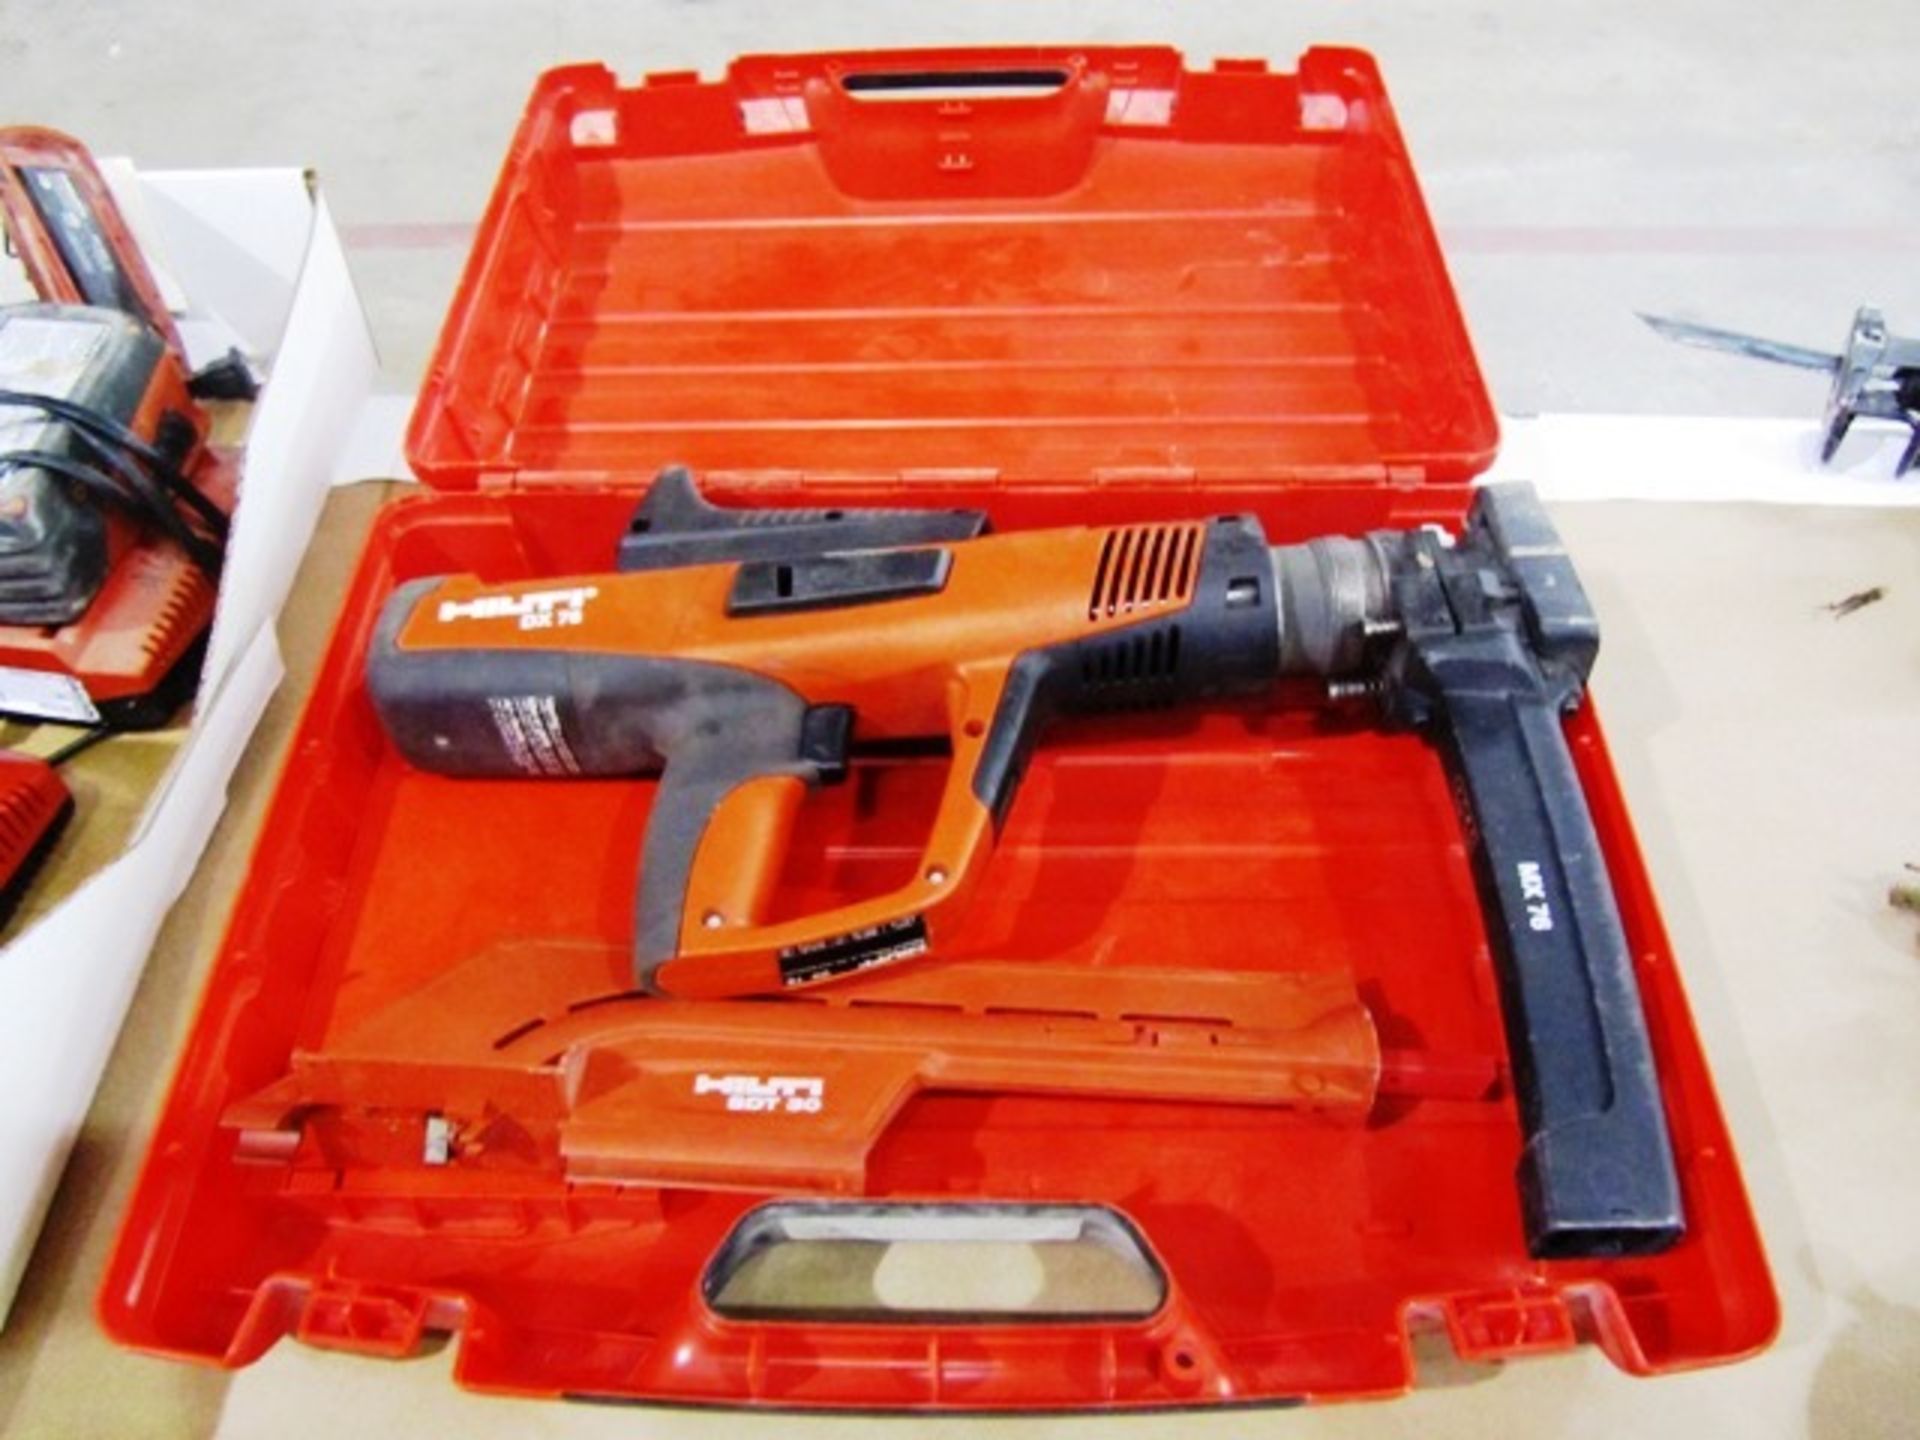 Hilti DX76 Powder Actuated Tool